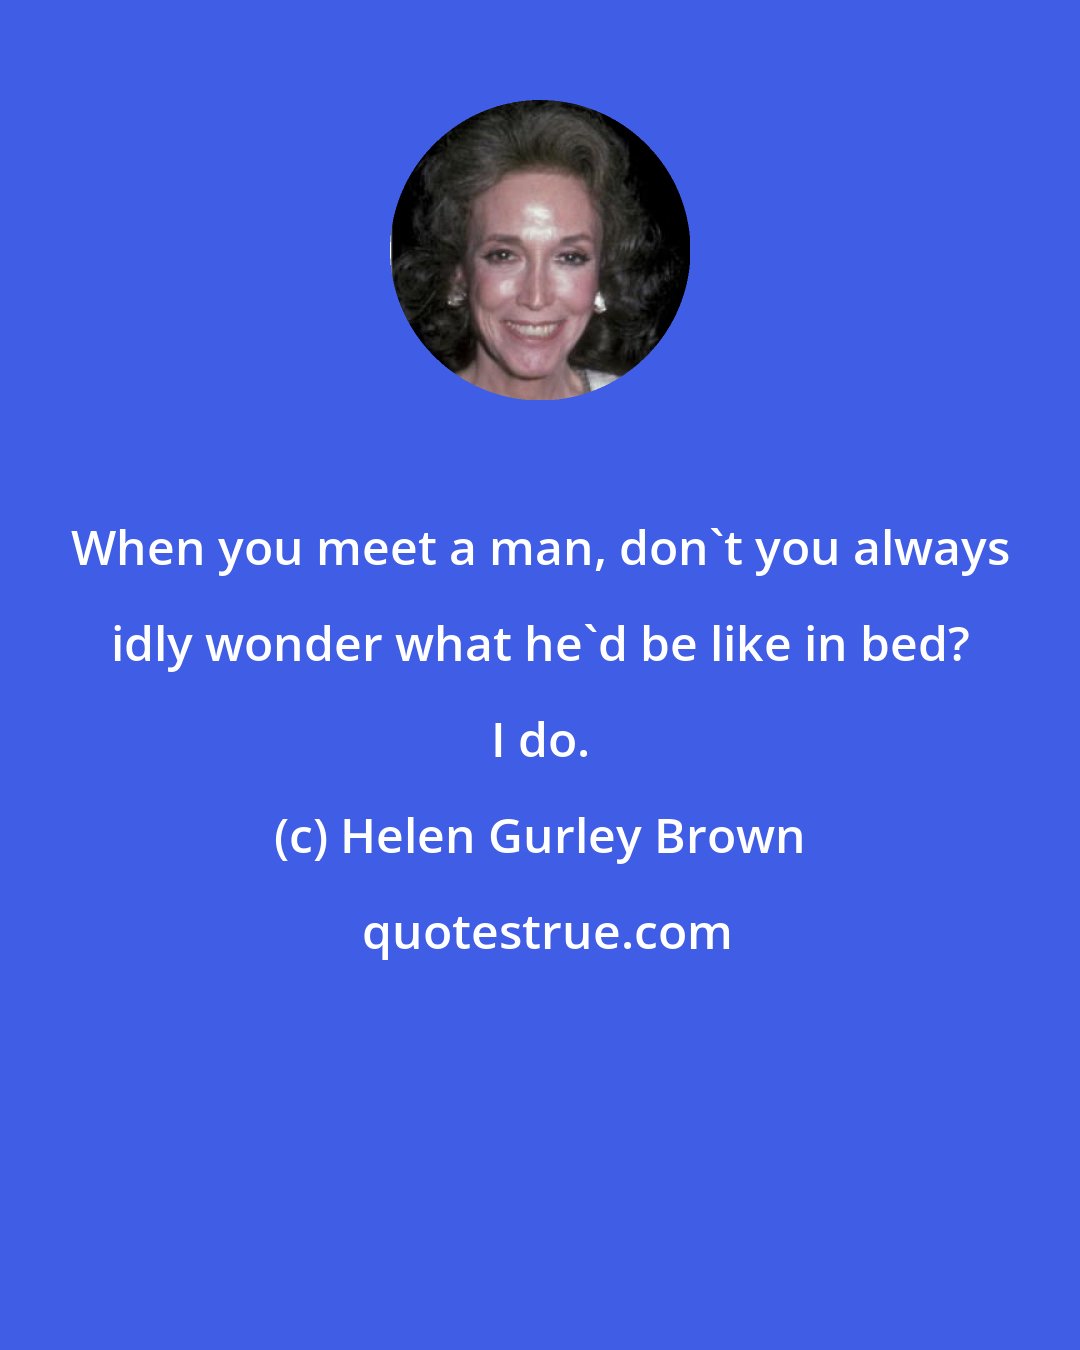 Helen Gurley Brown: When you meet a man, don't you always idly wonder what he'd be like in bed? I do.